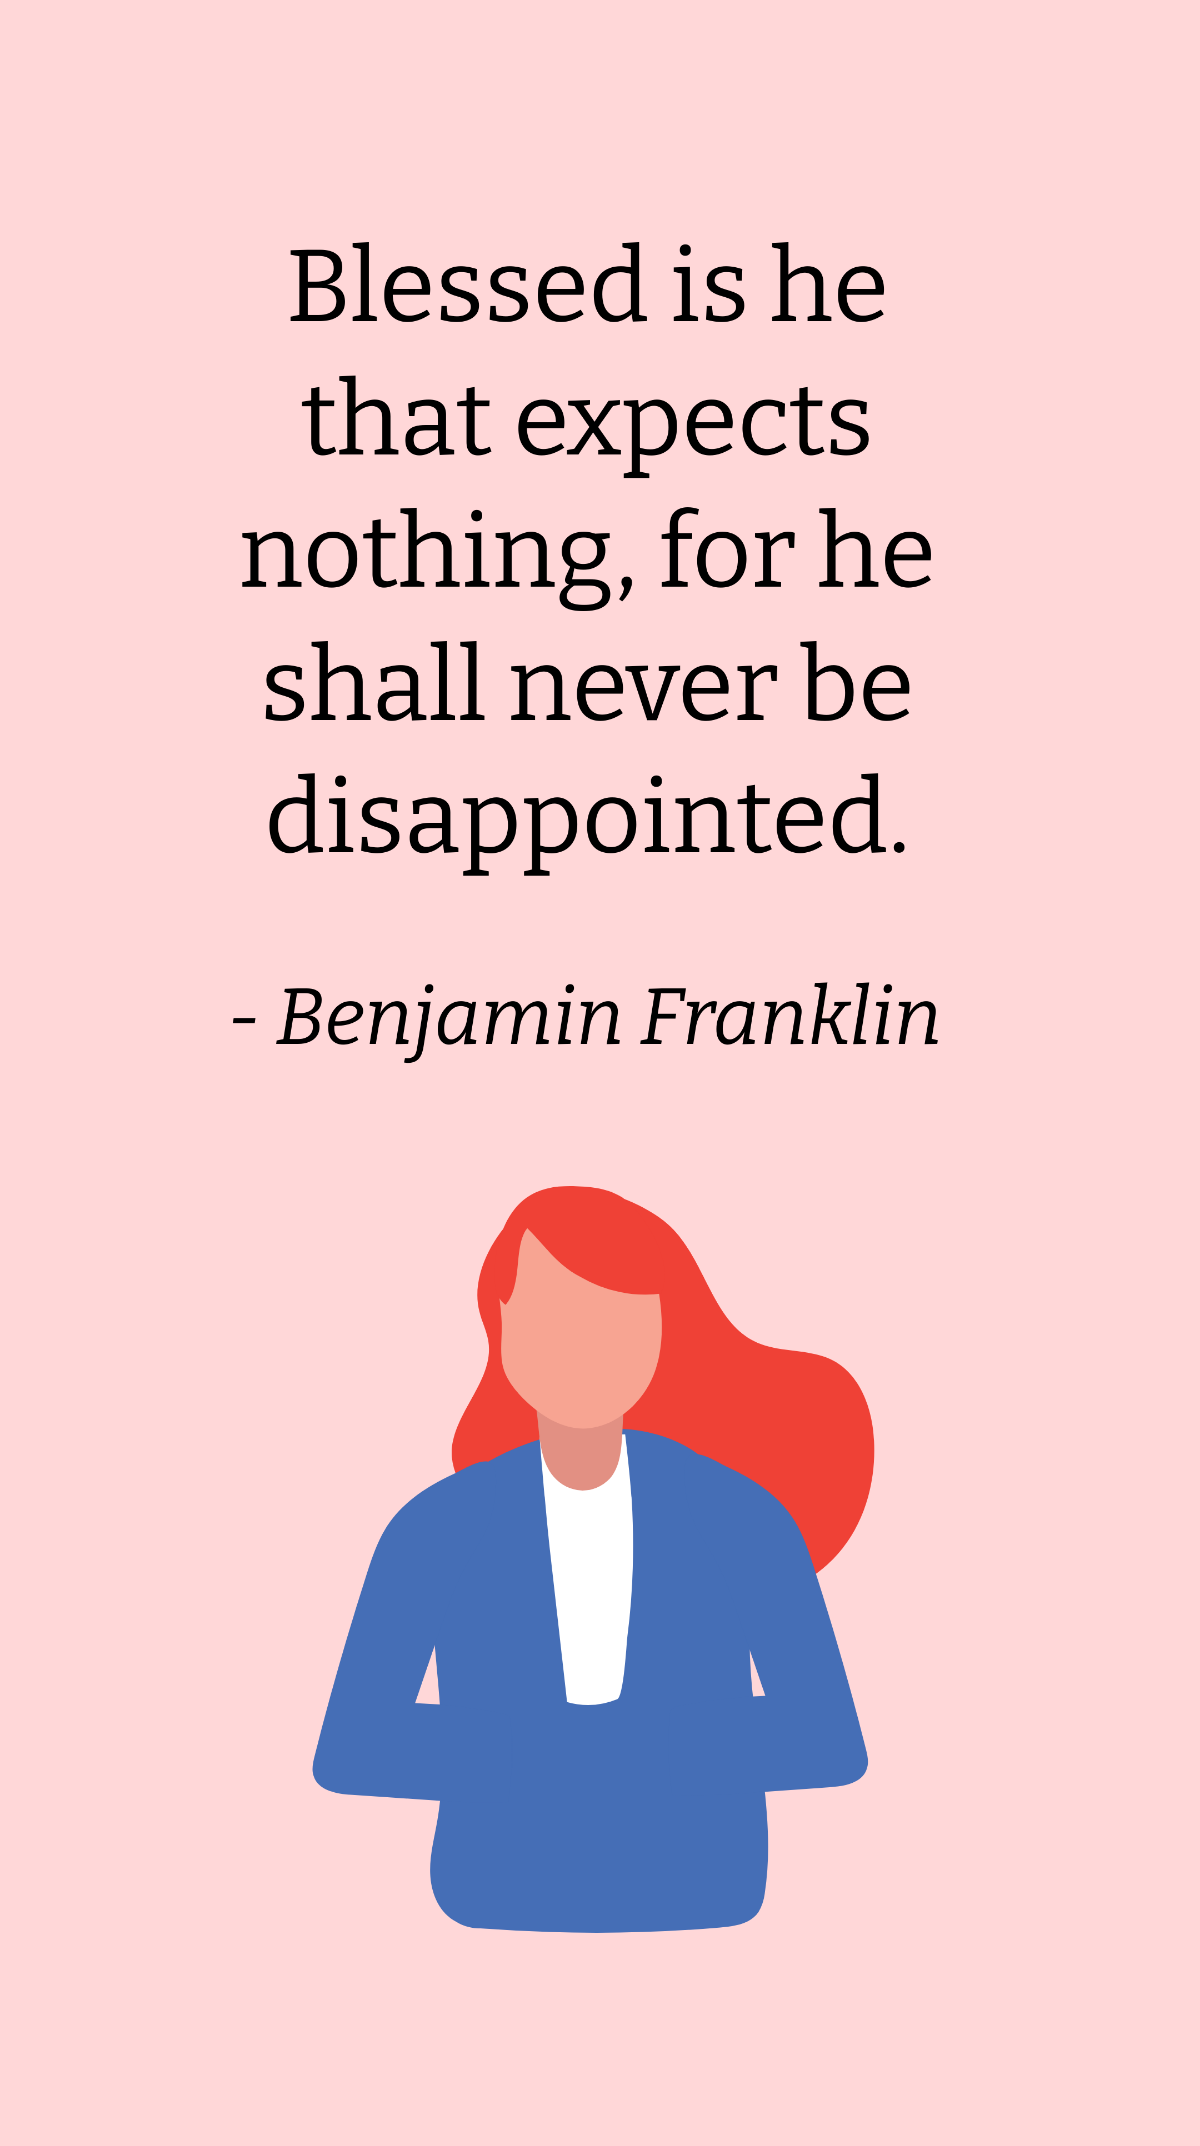 Free Benjamin Franklin - Blessed is he that expects nothing, for he shall never be disappointed. Template